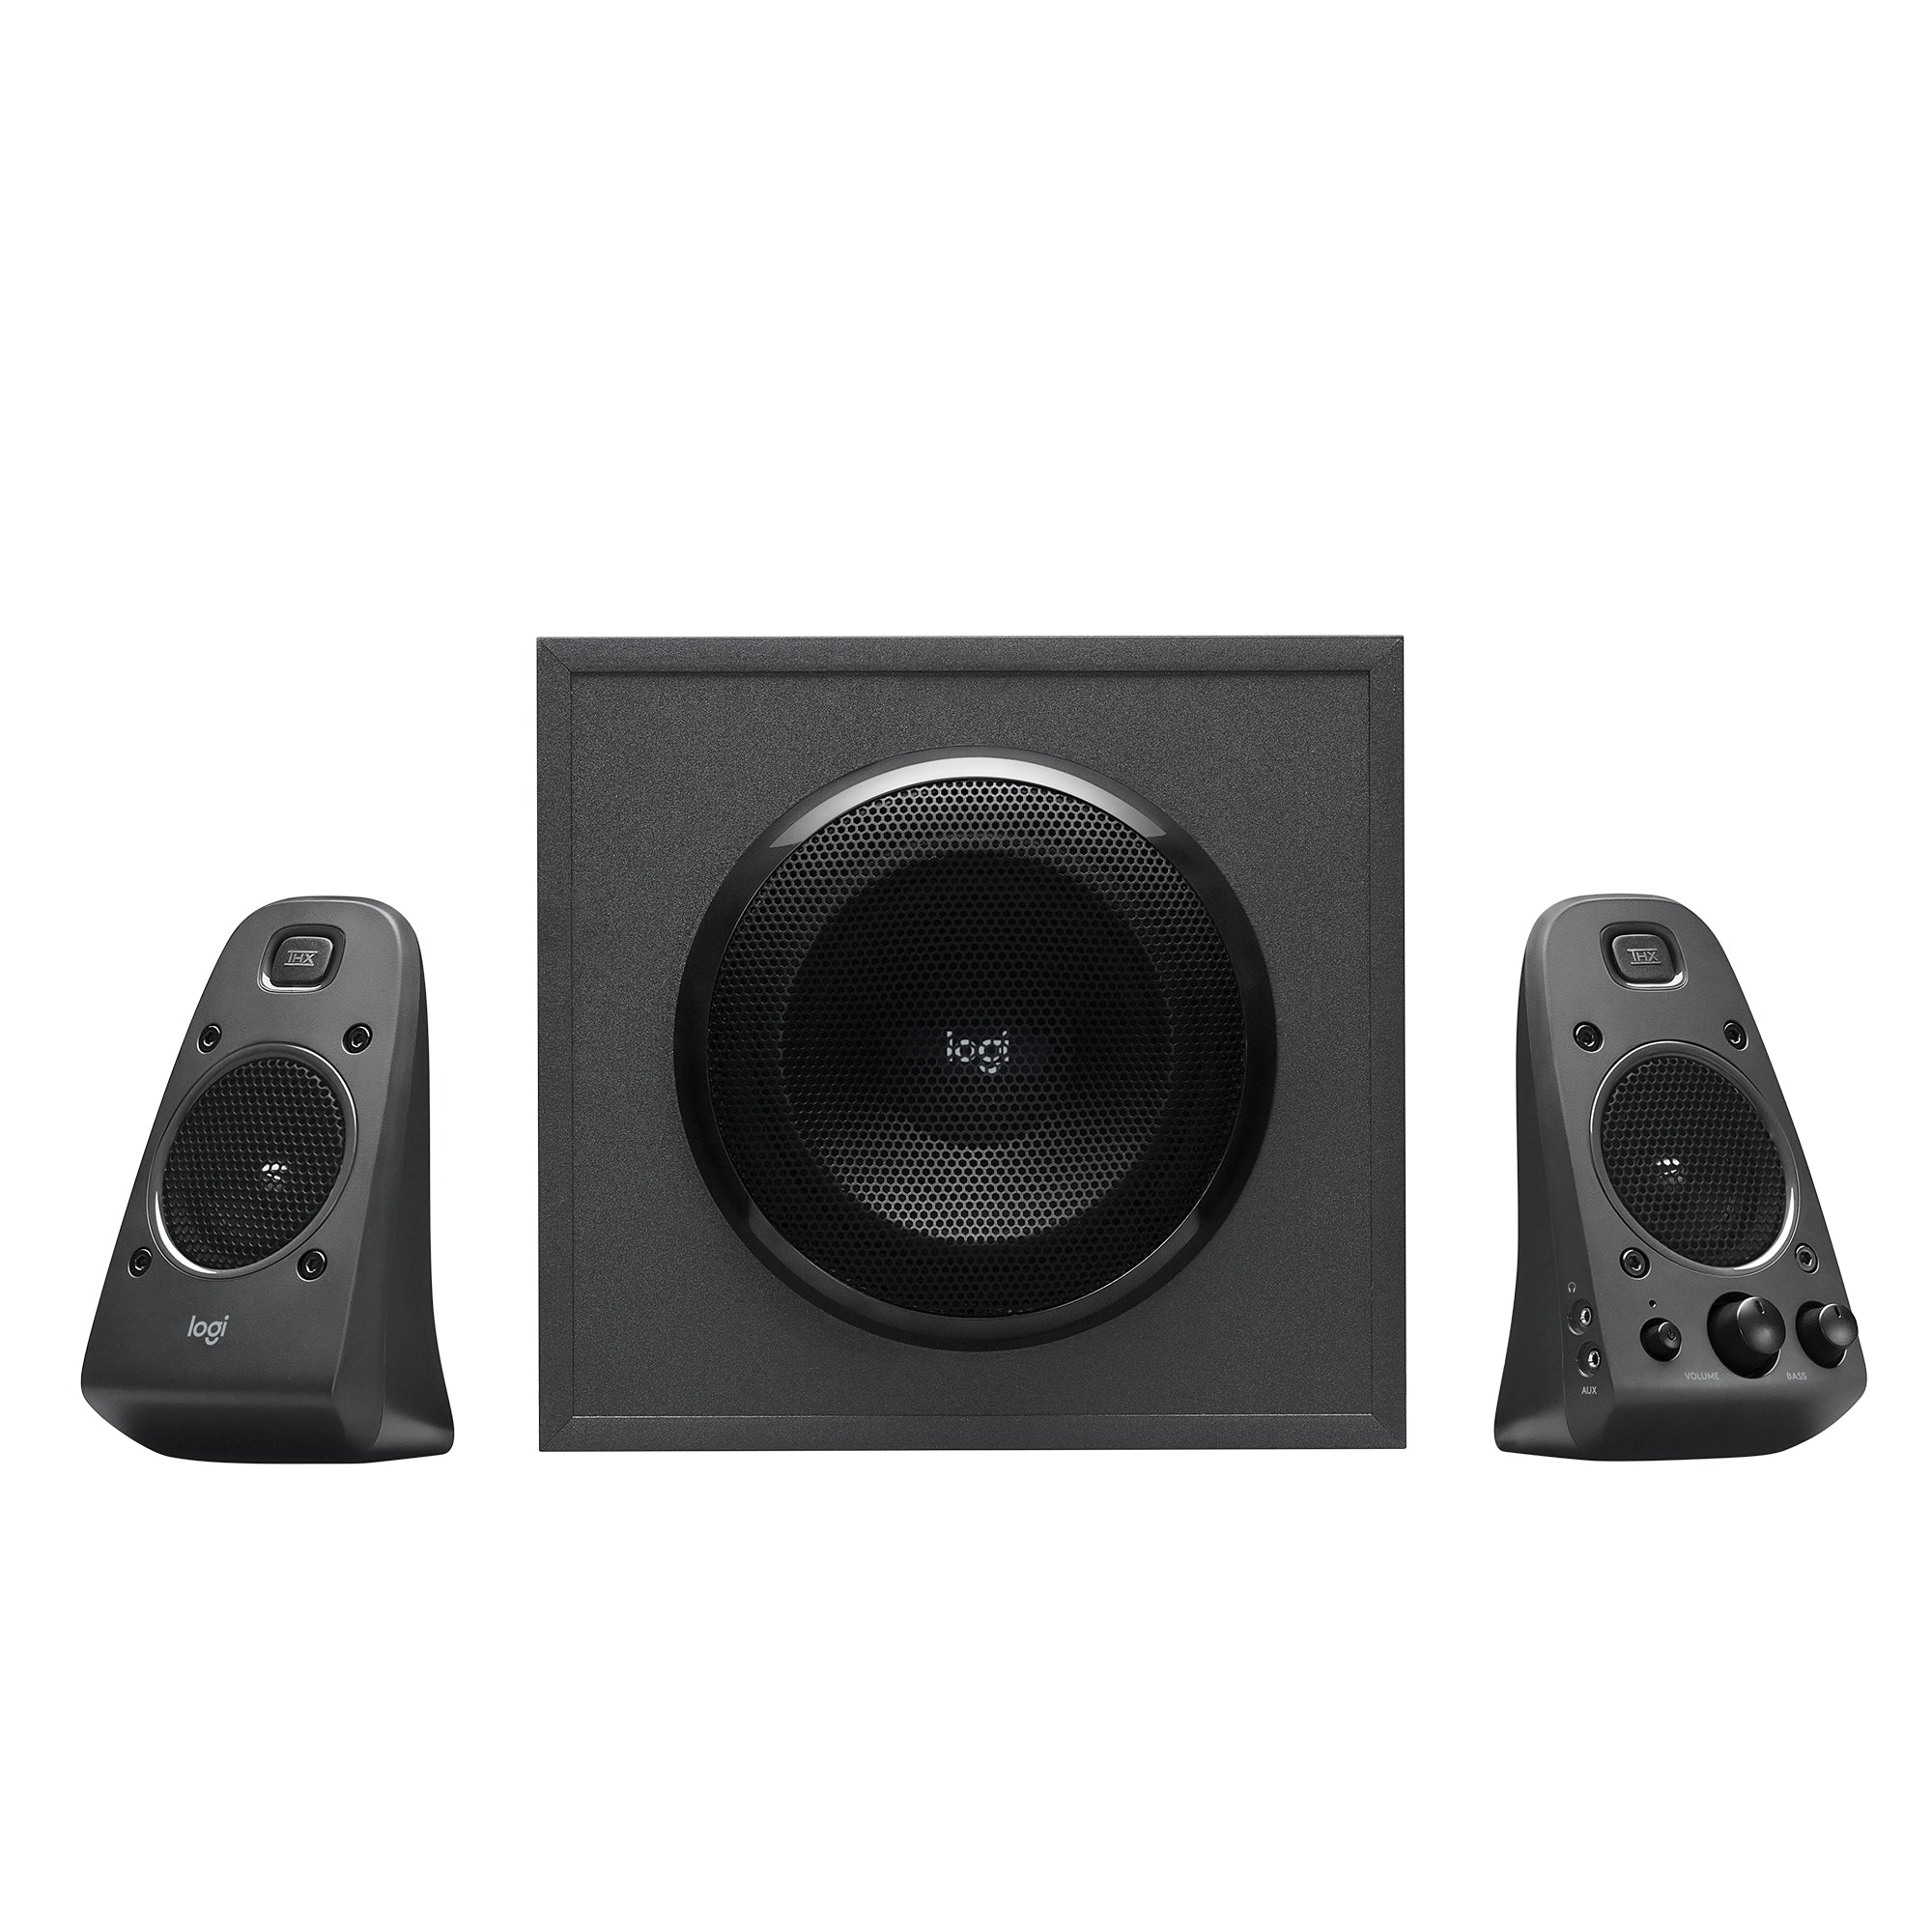 Logitech Z625 THX 2.1 Speaker System with Subwoofer, THX Certified Audio, 400 Watts Peak Power, Deep Bass, Multi-Device, 3.5 mm and RCA Inputs, PC/PS4/Xbox/DVD Player/TV/Smartphone/Tablet